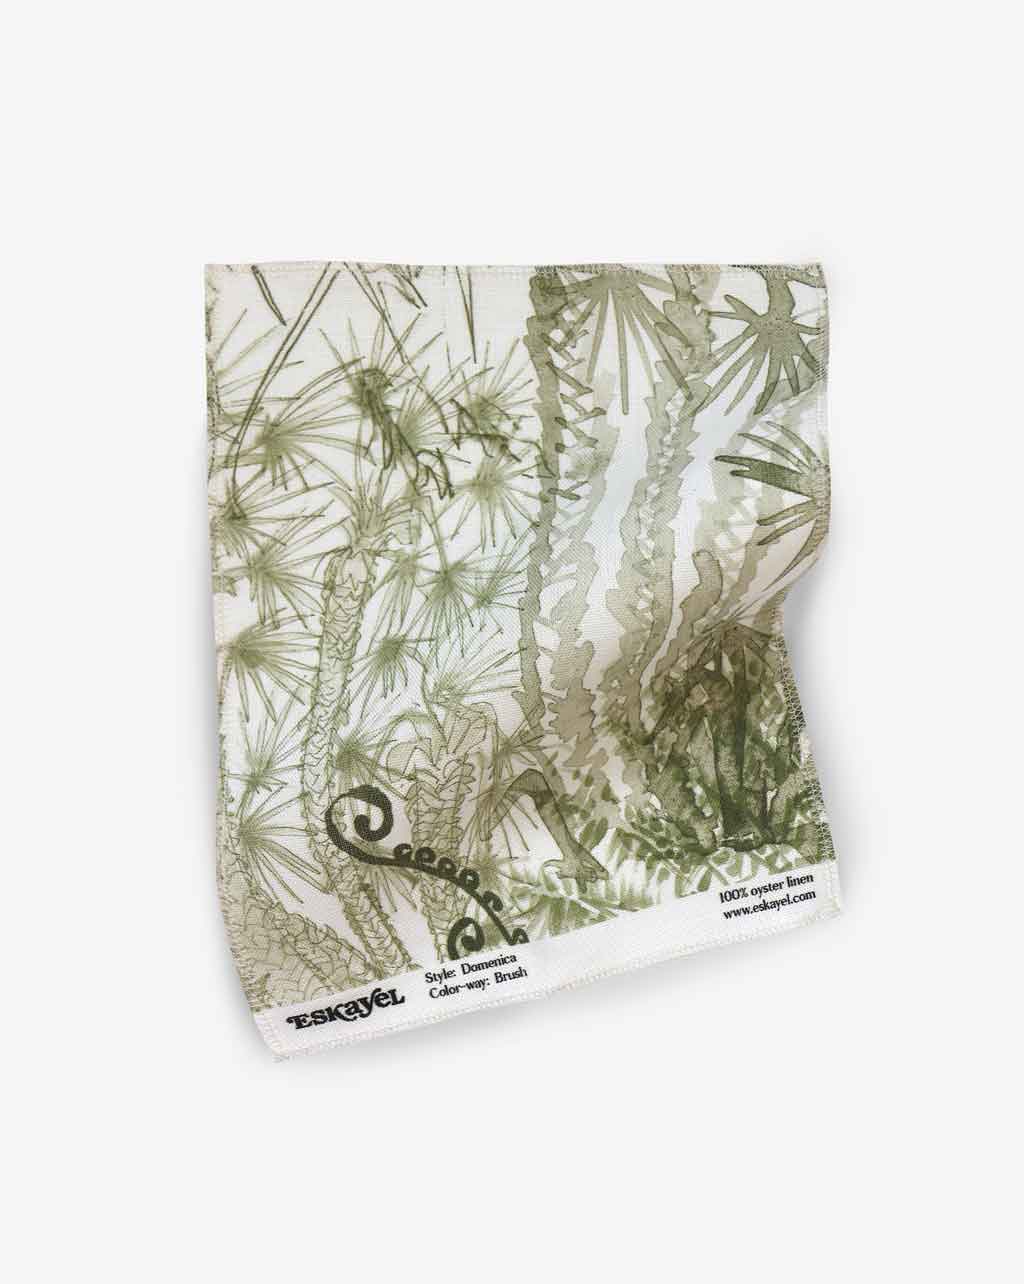 Order: A Domenica Fabric Sample Brush with a plant image on it